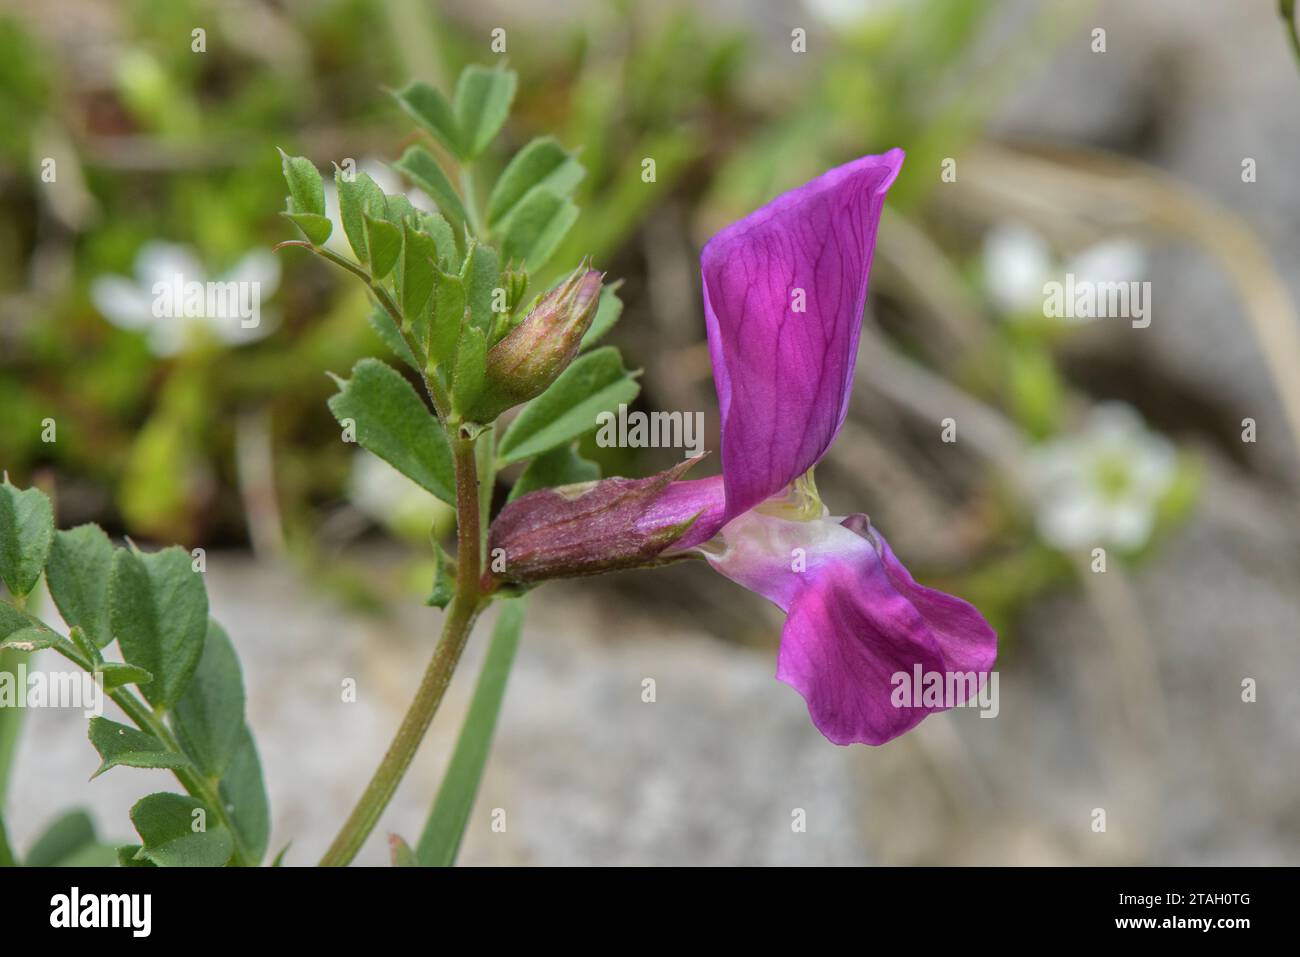 Pyrenean Vetch, Vicia pyrenaica in flower on high limestone scree, Pyrenees. Stock Photo